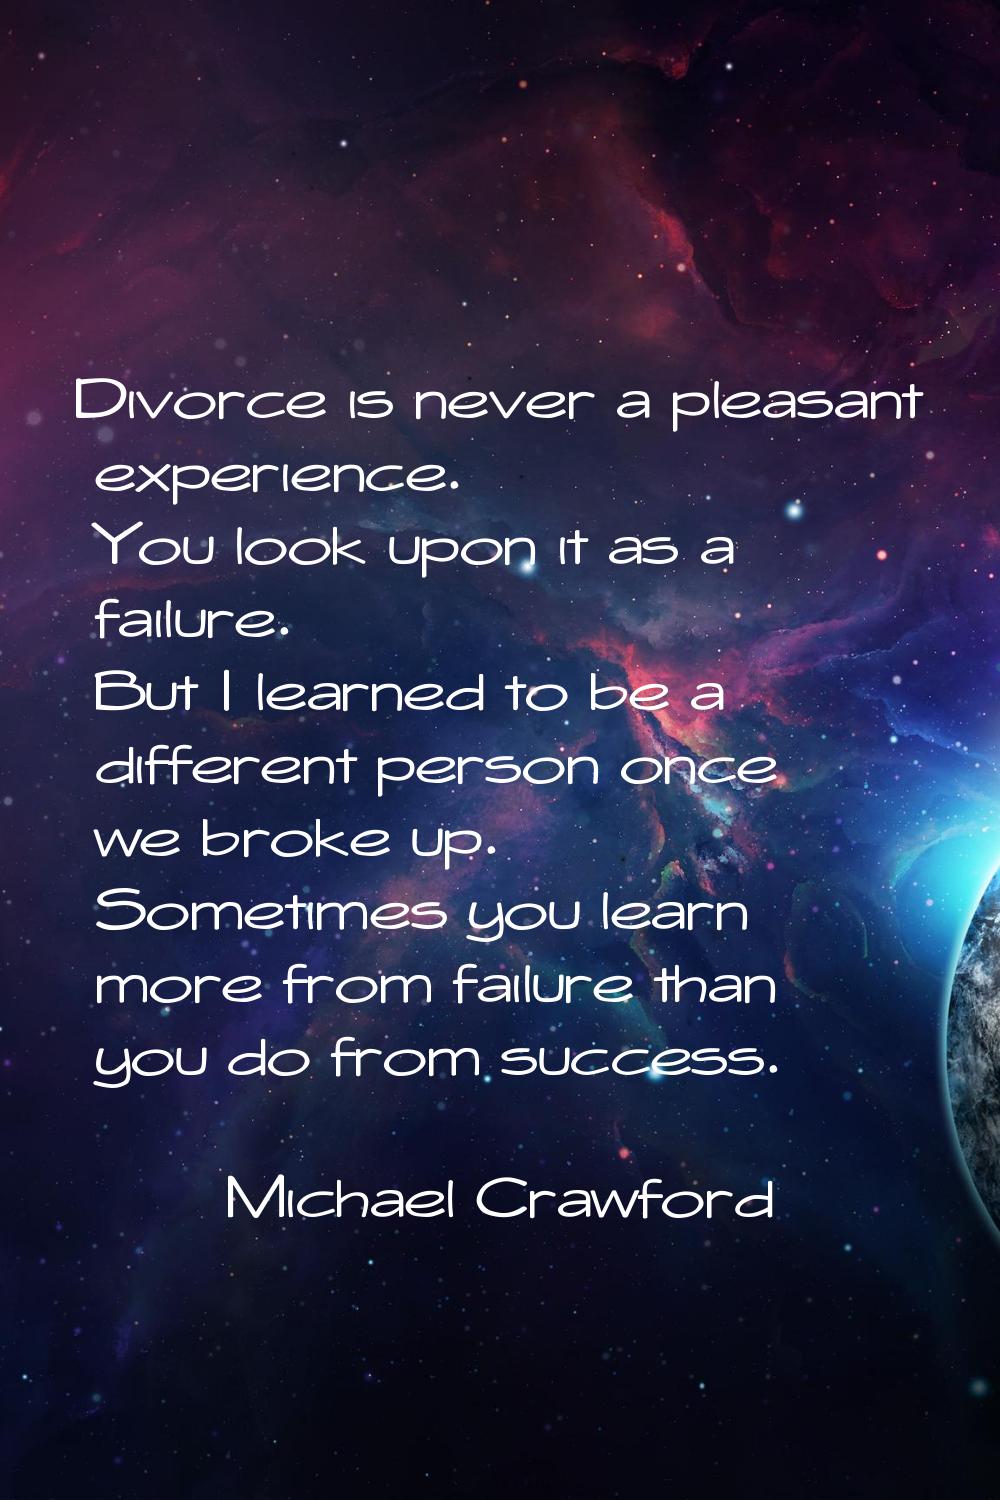 Divorce is never a pleasant experience. You look upon it as a failure. But I learned to be a differ